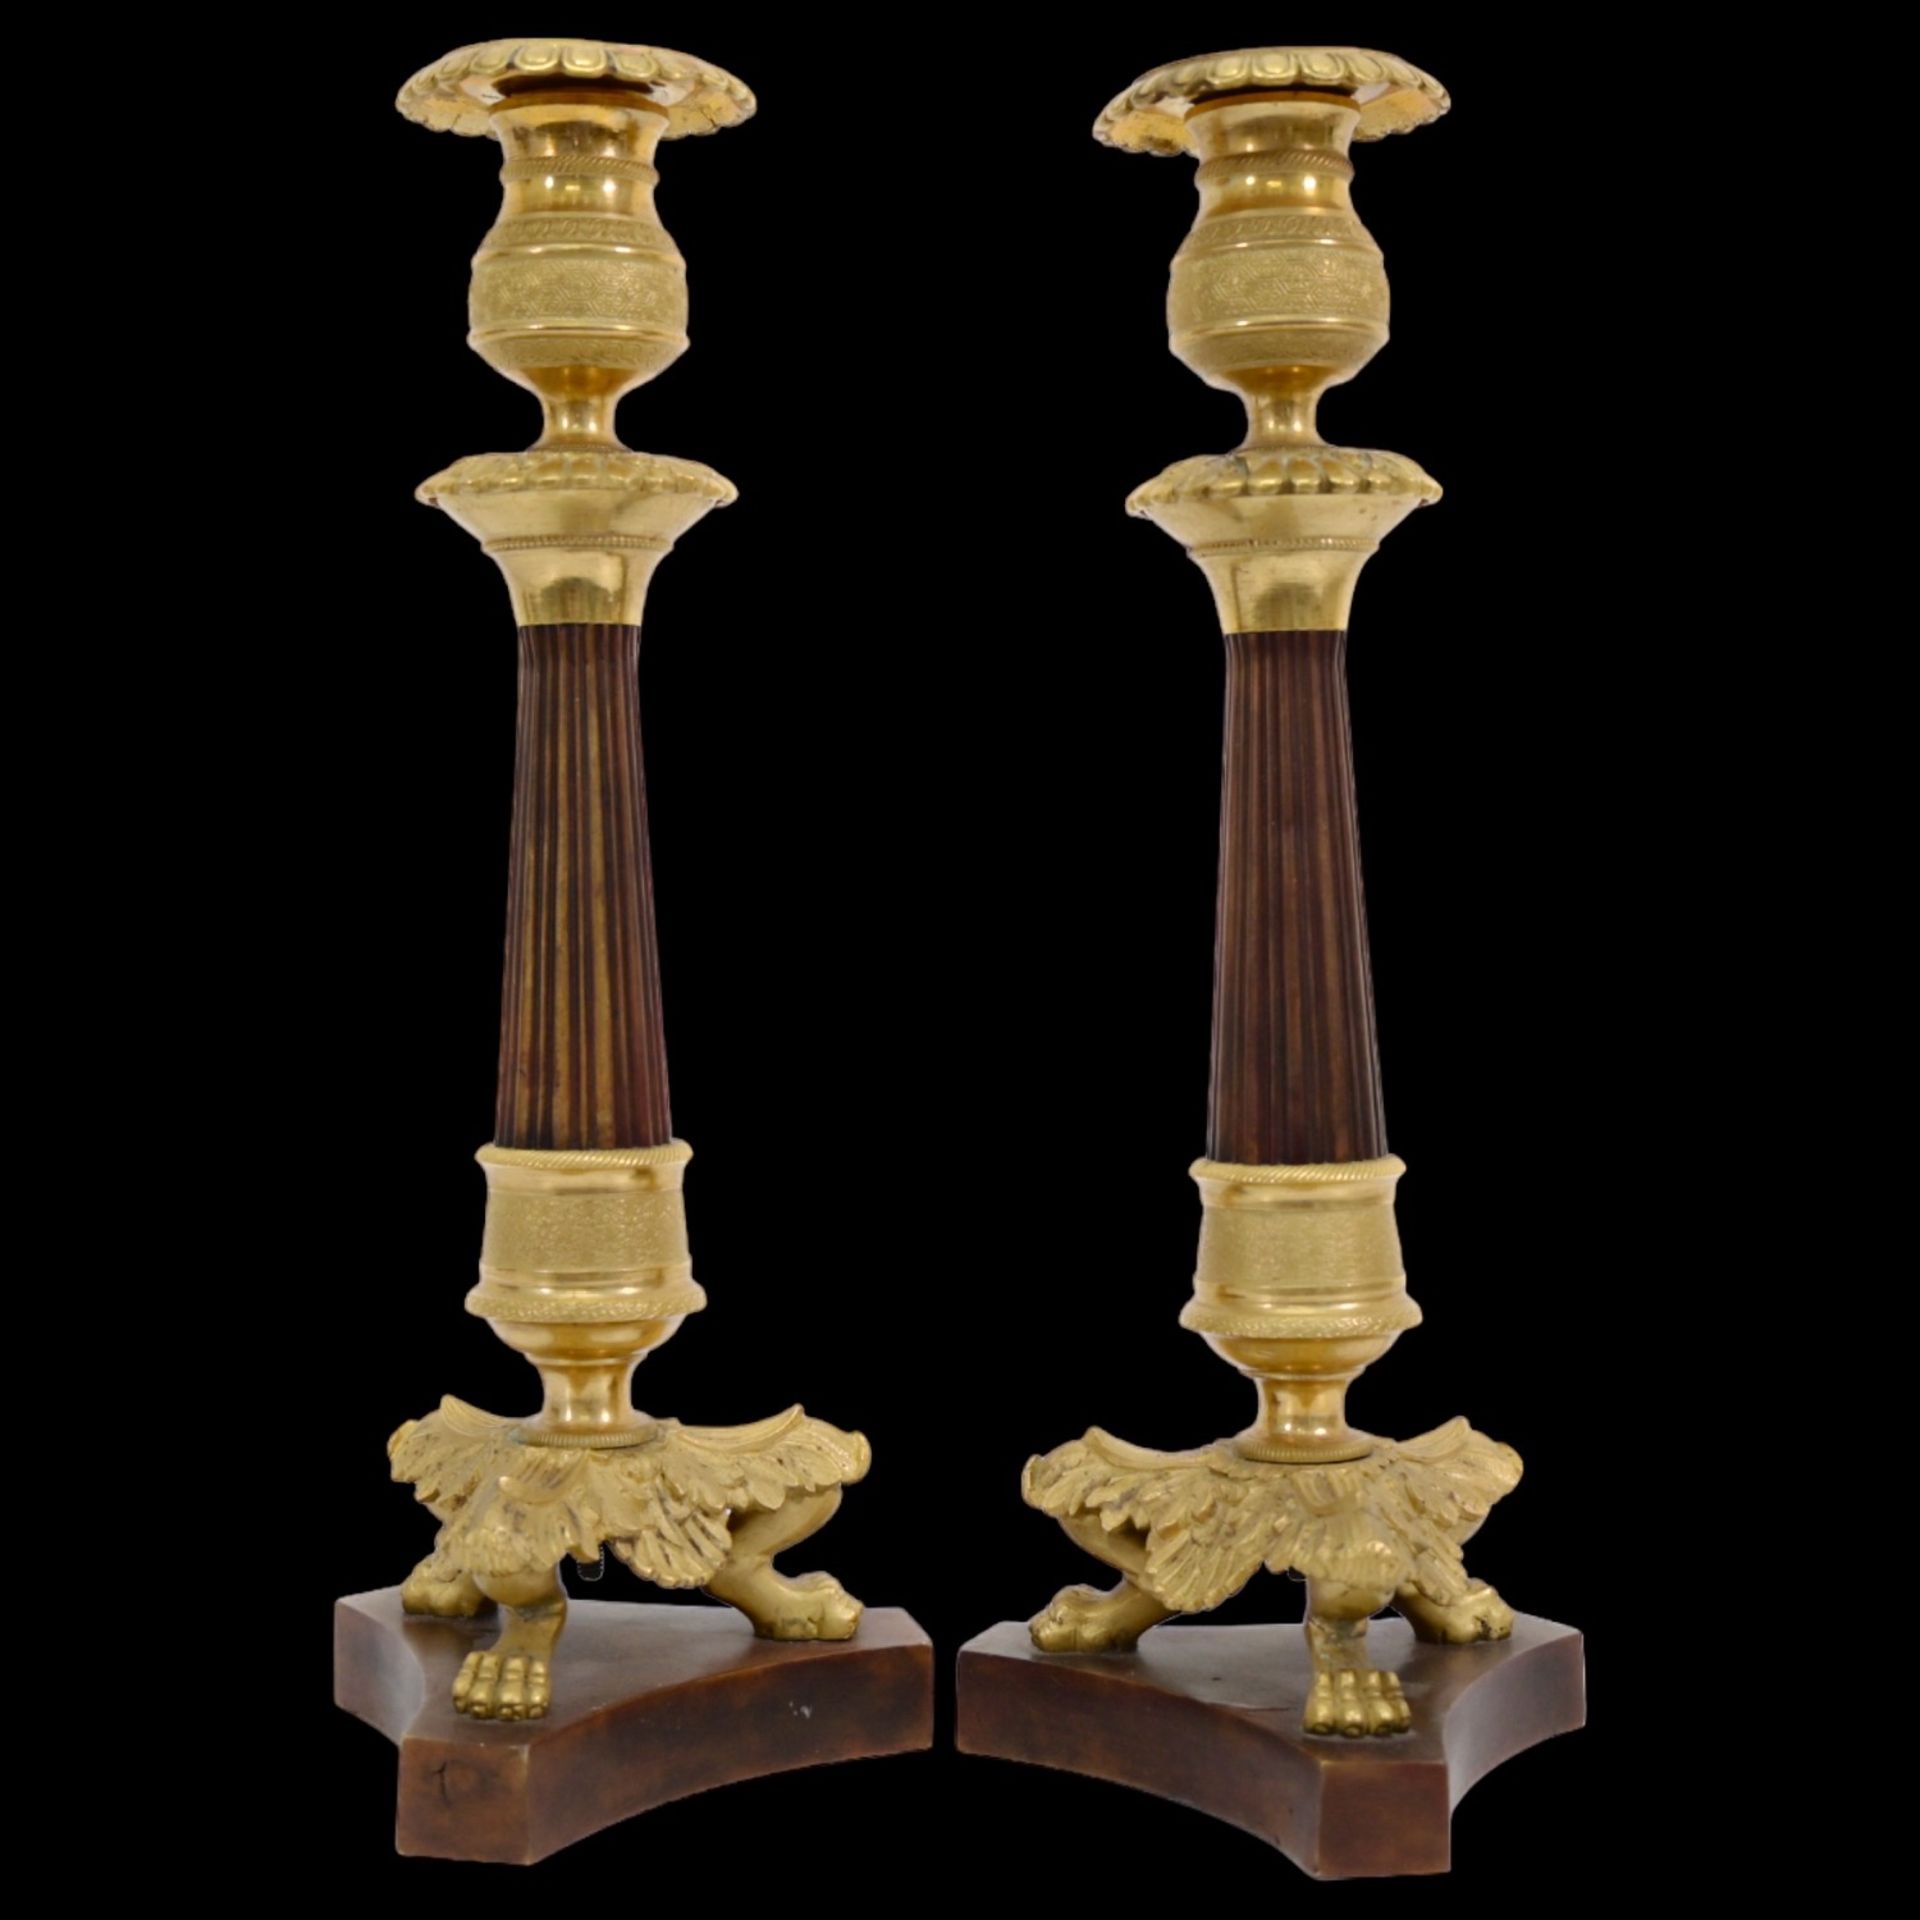 Pair of candlesticks in gilded bronze and wood, France, 19th century, collectibles and home decor. - Image 2 of 9